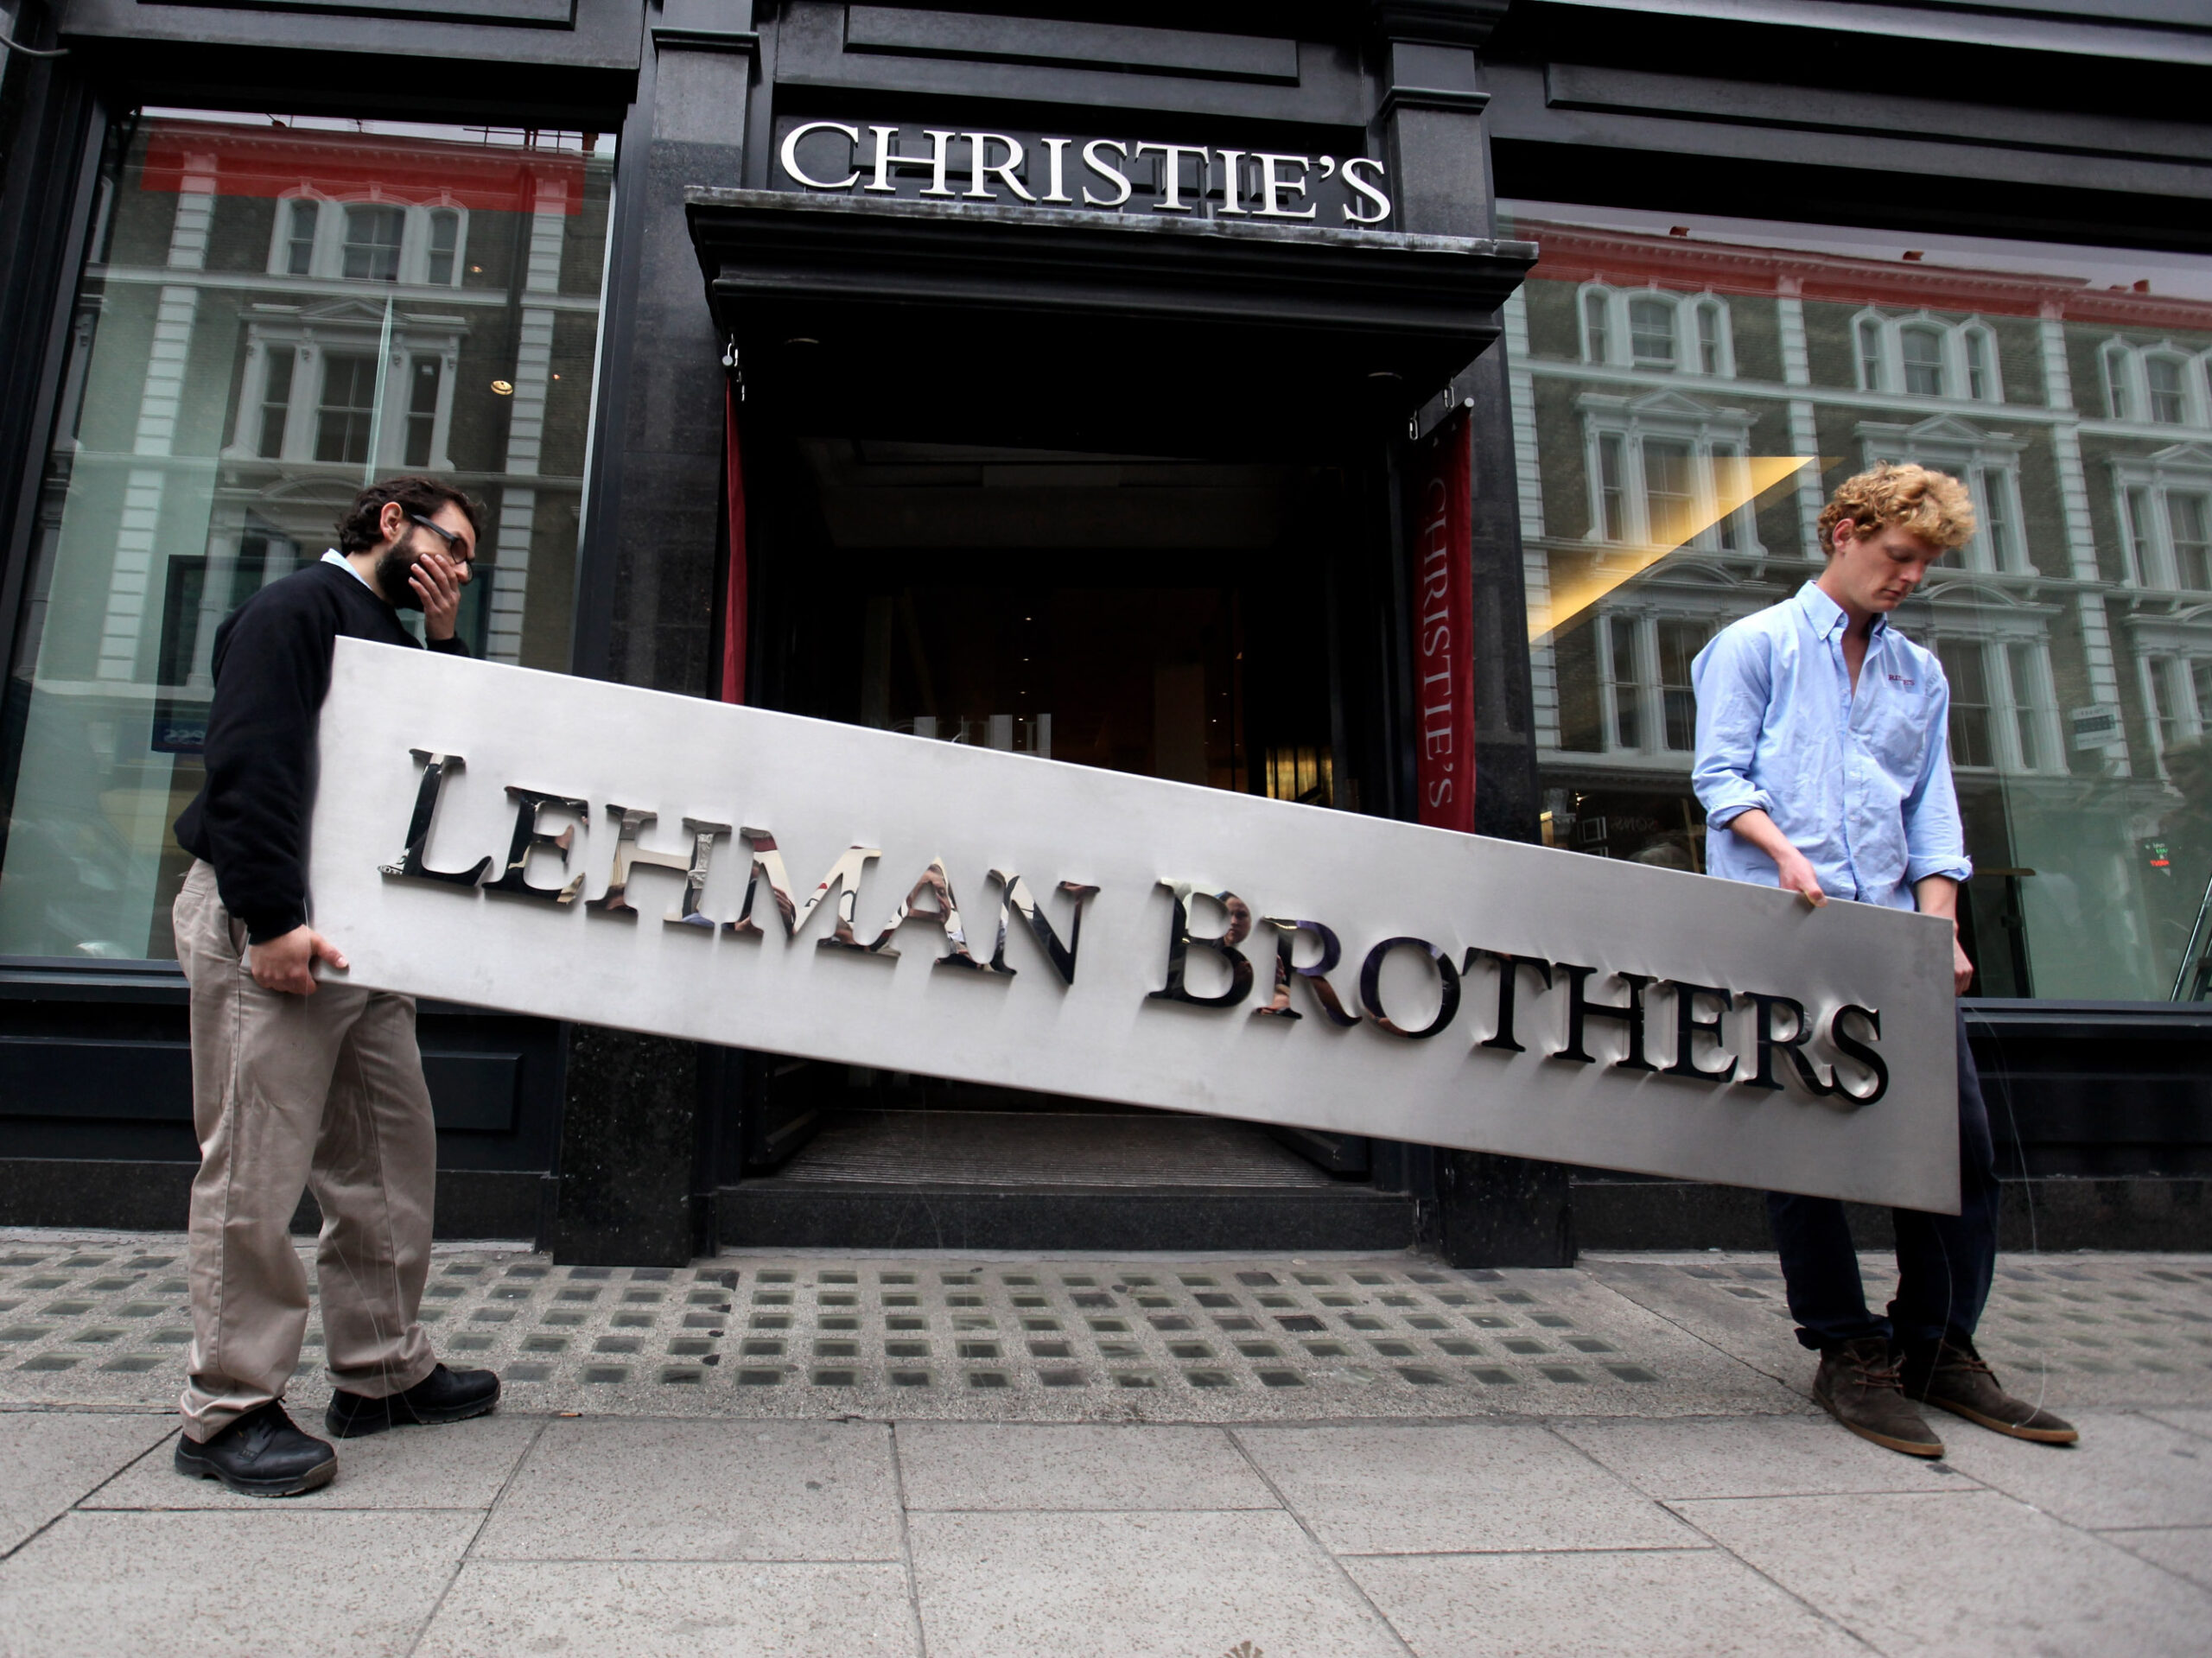 two people hold a sign that says "Lehman Brothers"